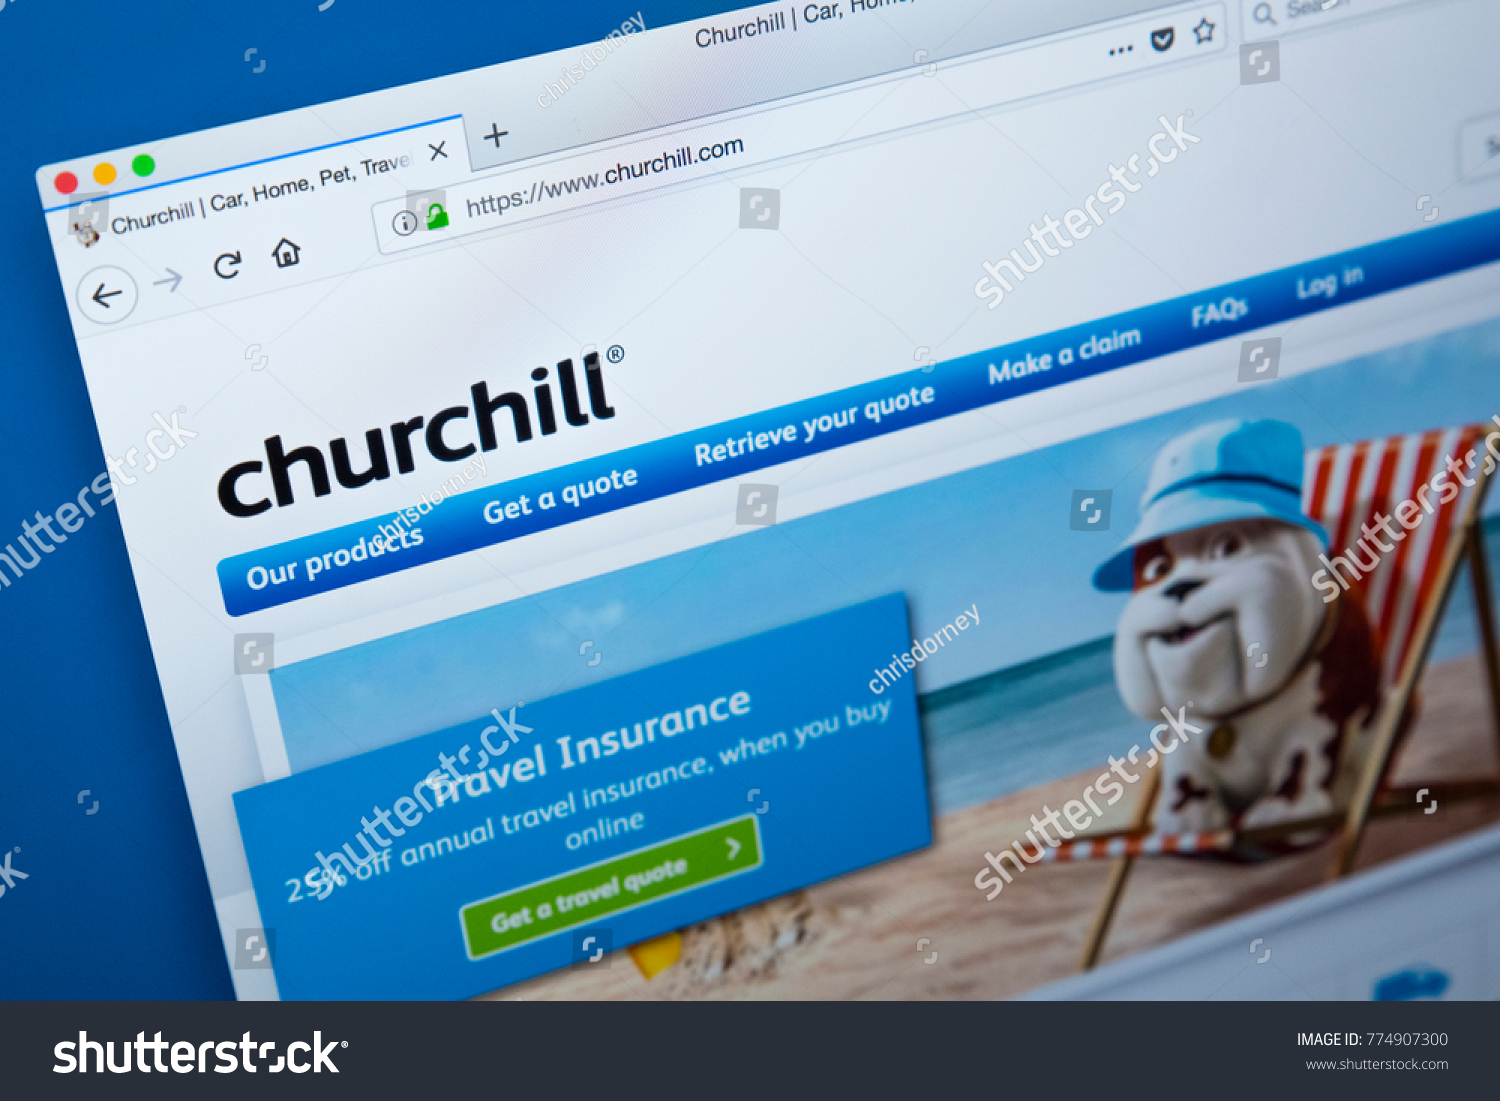 Churchill Insurance Images Stock Photos Vectors intended for size 1500 X 1101